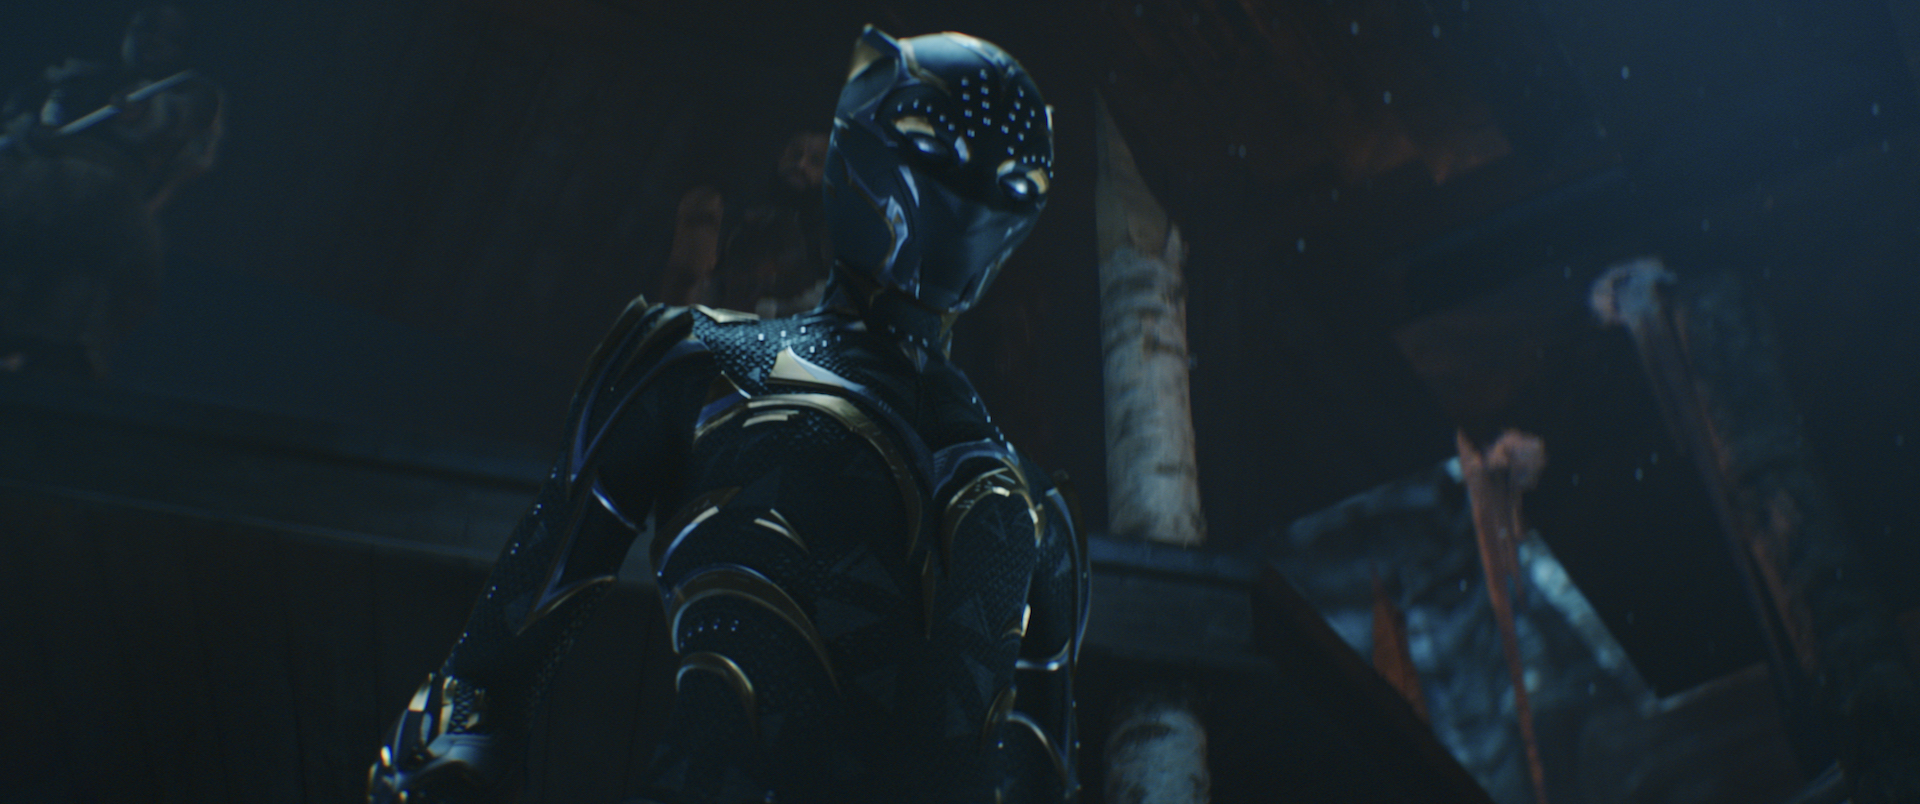 It's been four years since Marvel's Black Panther premiere broke box office records and immediately became a fan favorite worldwide. Finally, the wait is over. The new trailer for the Marvel film is here.